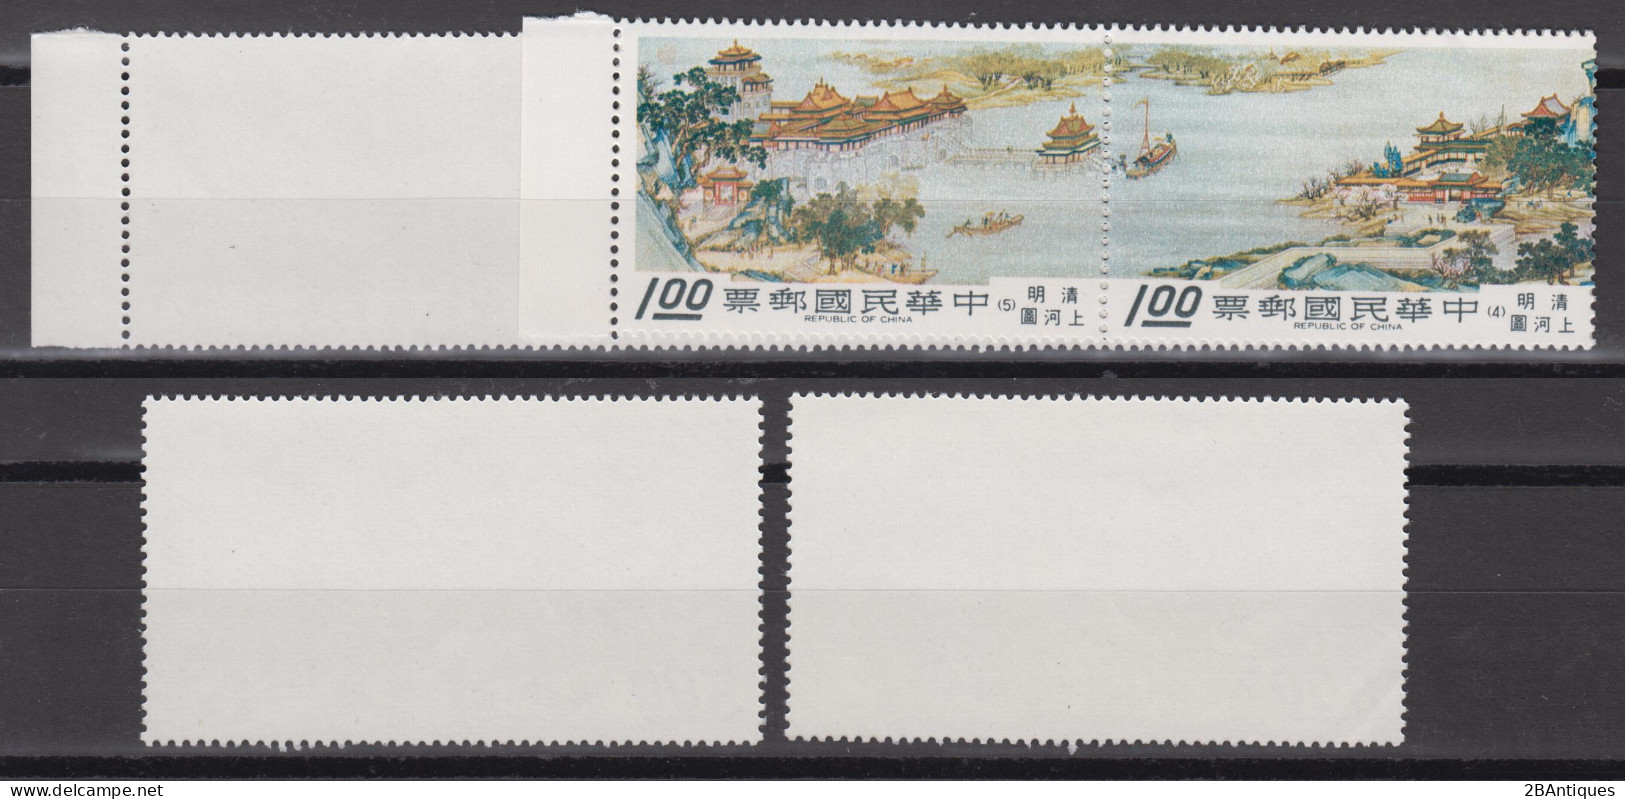 TAIWAN 1968 - "A City Of Cathay", Scroll, Palace Museum COMPLETE SET MNH** OG XF - Nuovi